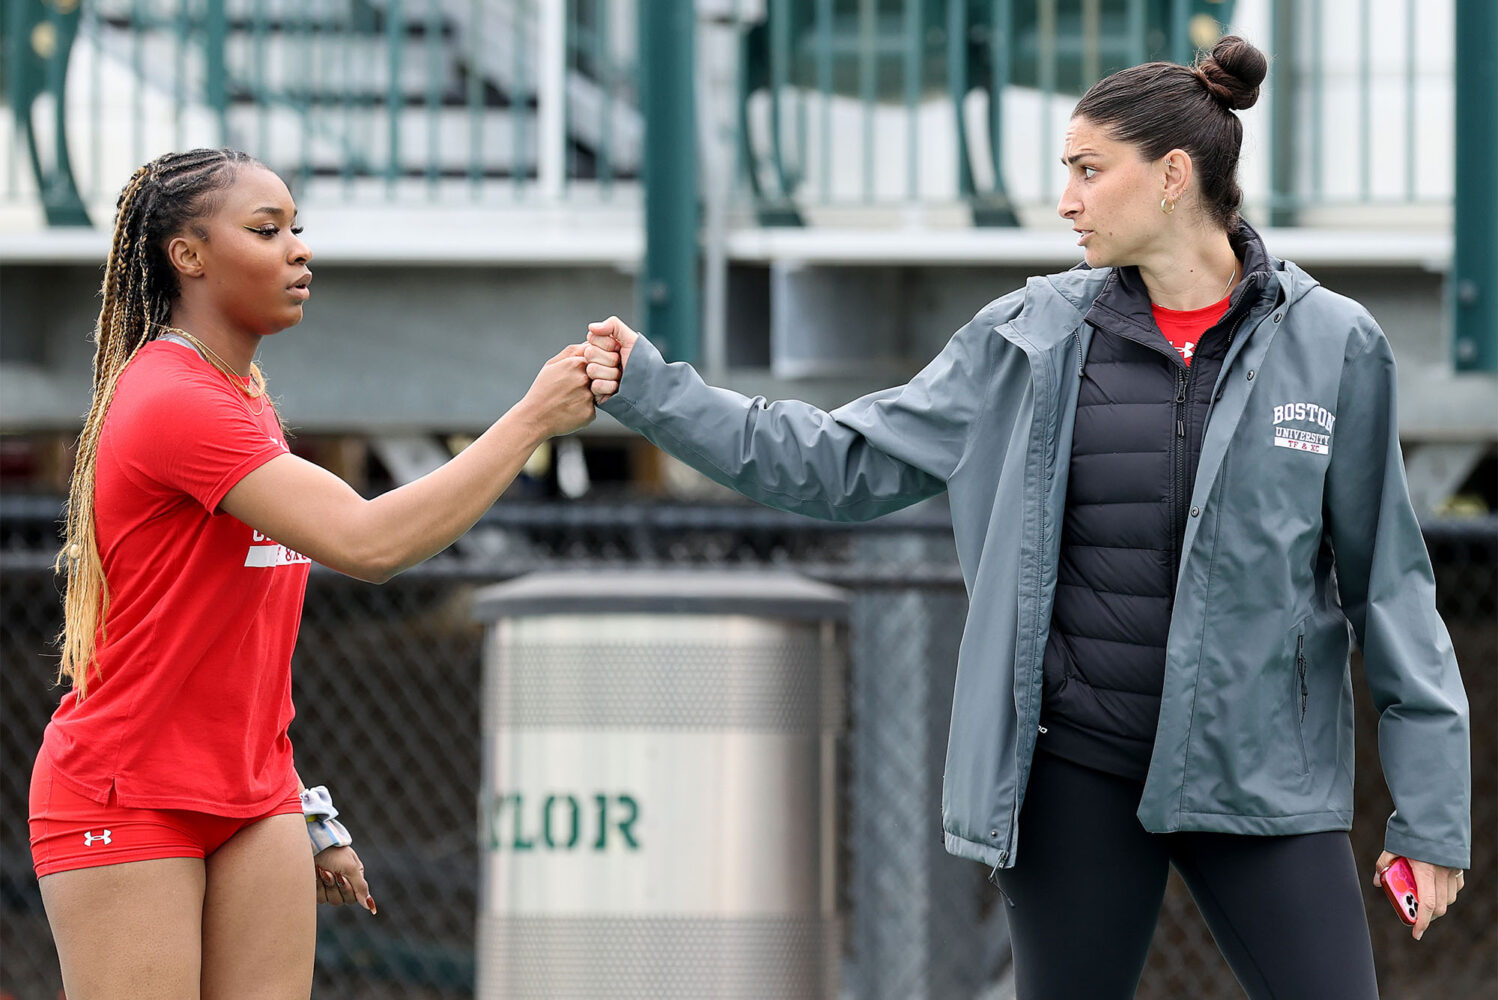 Photo: Two woman fist bumping each other at a track meet. Reigning Patriot League Indoor Women’s Field Athlete of the Meet Peace Omonzane (CAS’26) fistbumps jumps and multis coach Sara Macey.